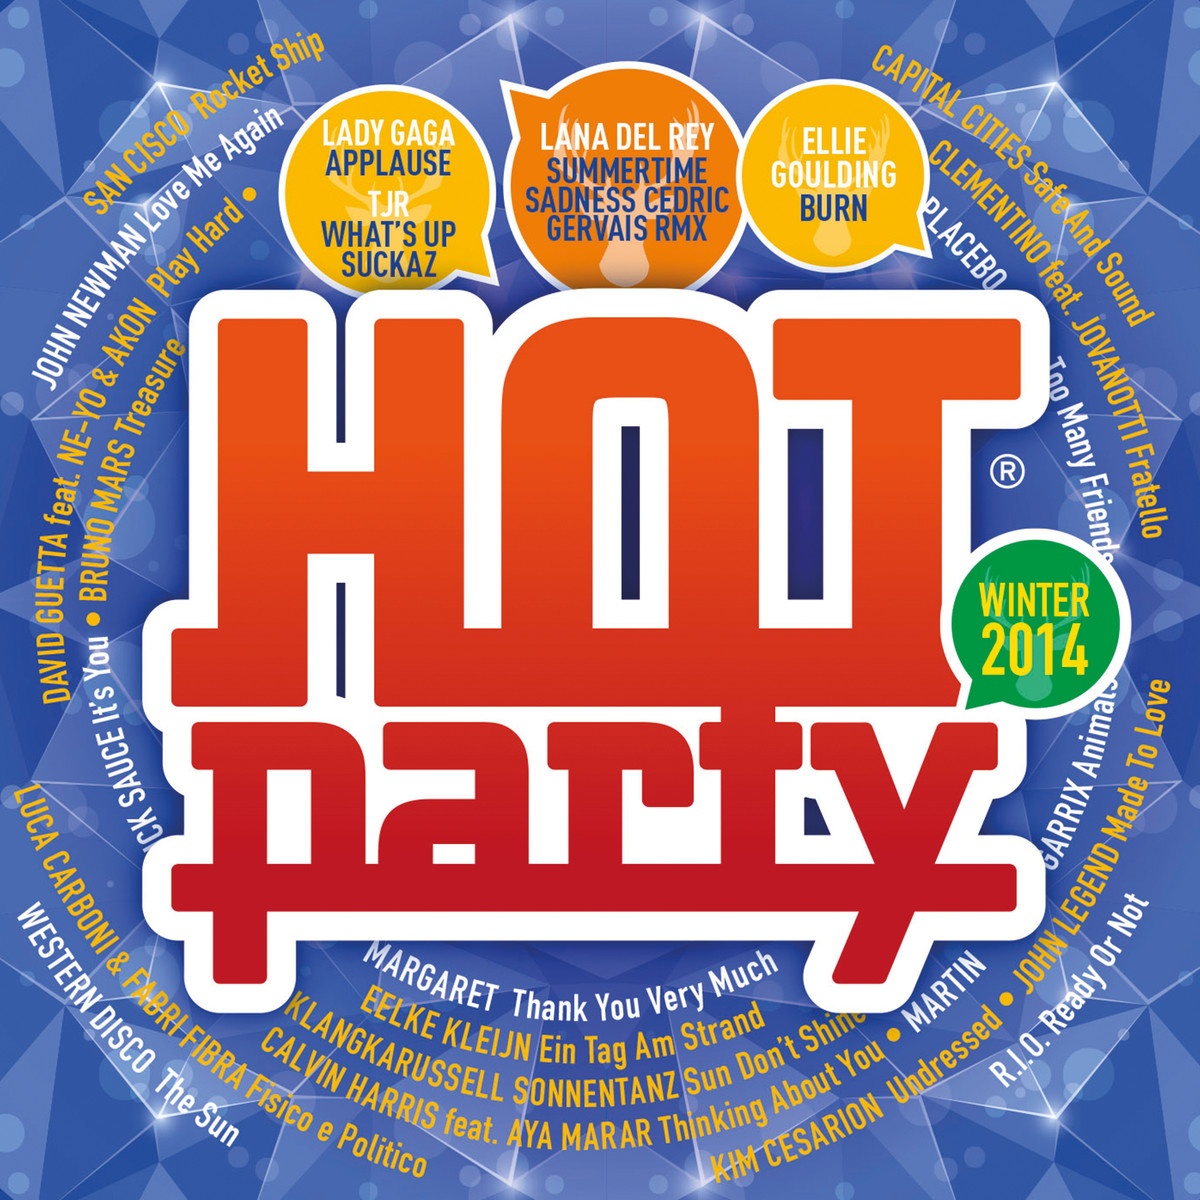 Hot Party Winter 2014